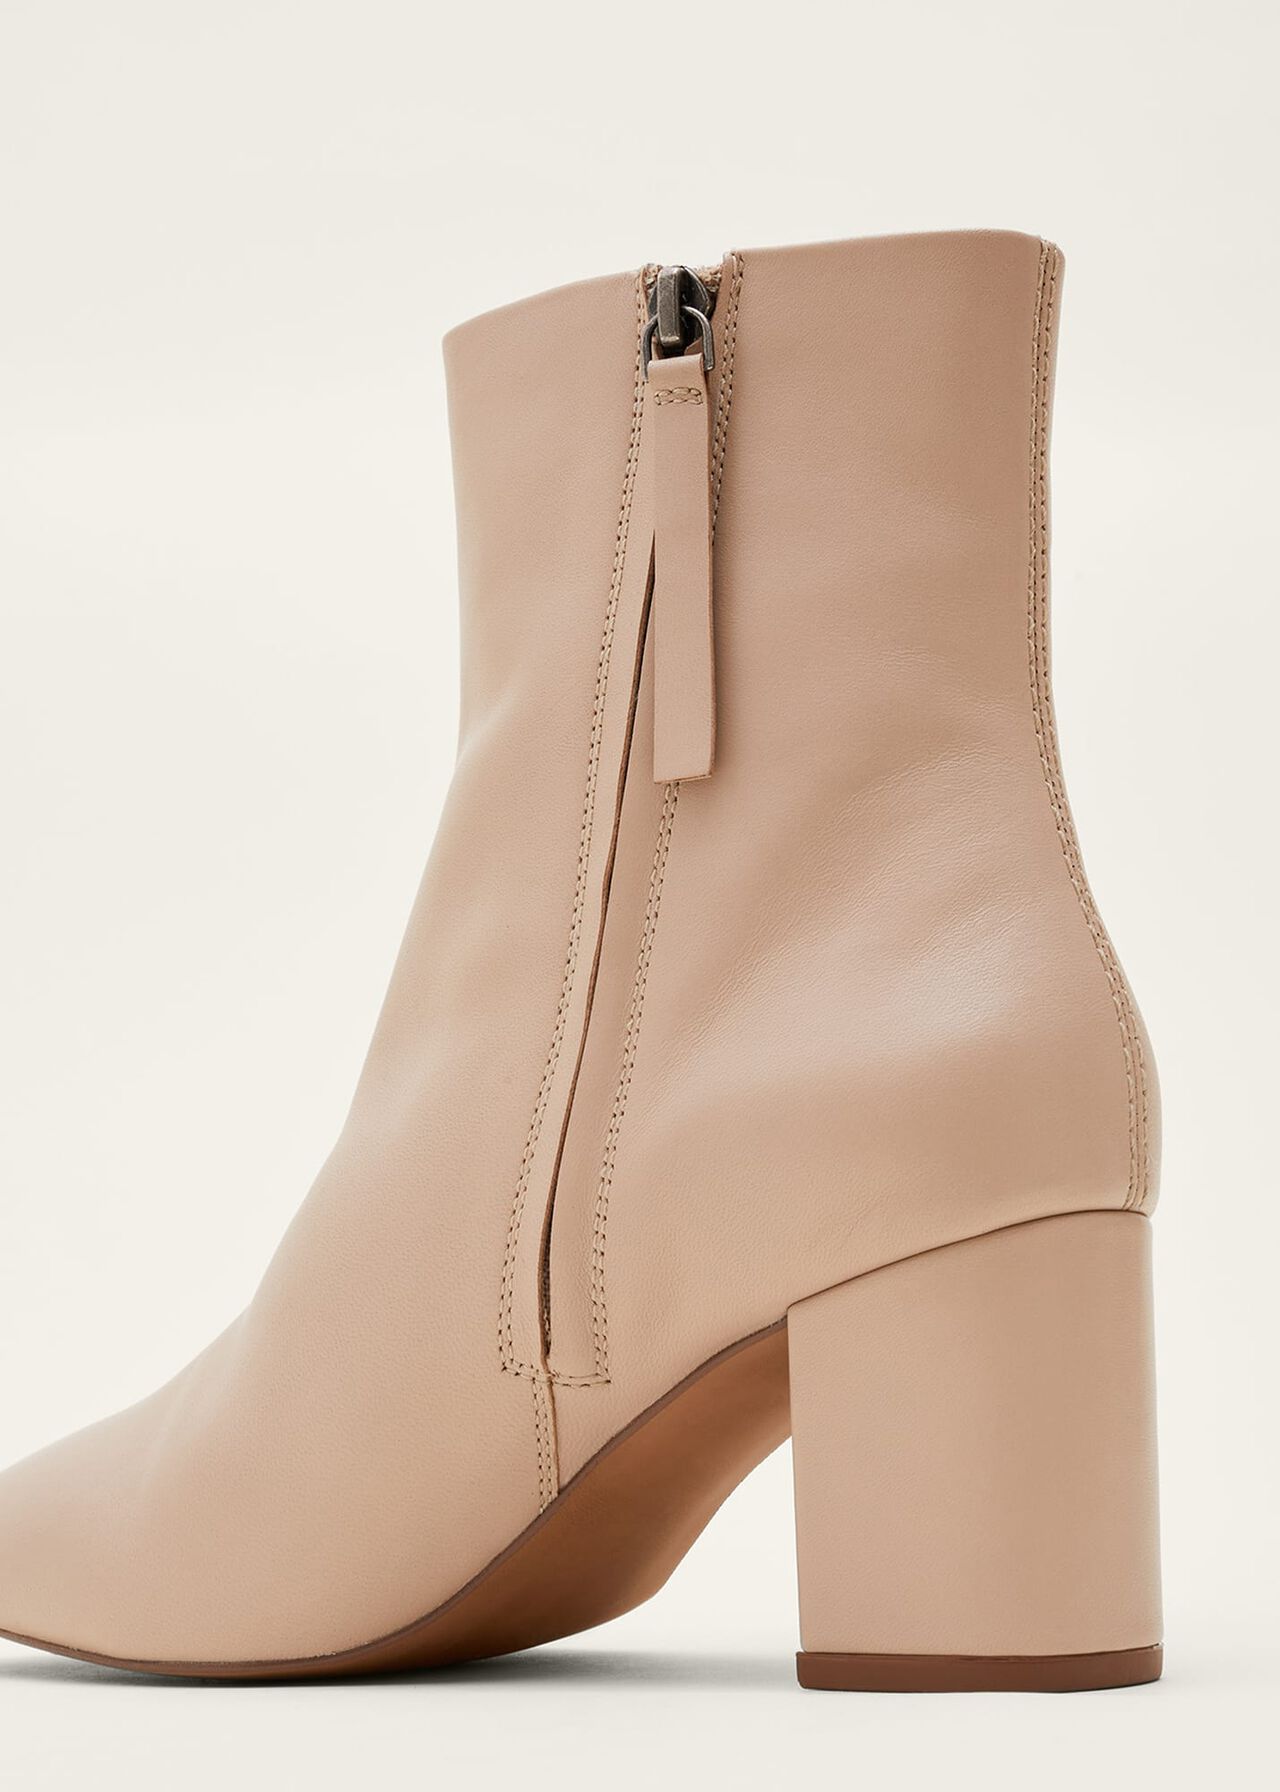 Stitched Leather Ankle Boot